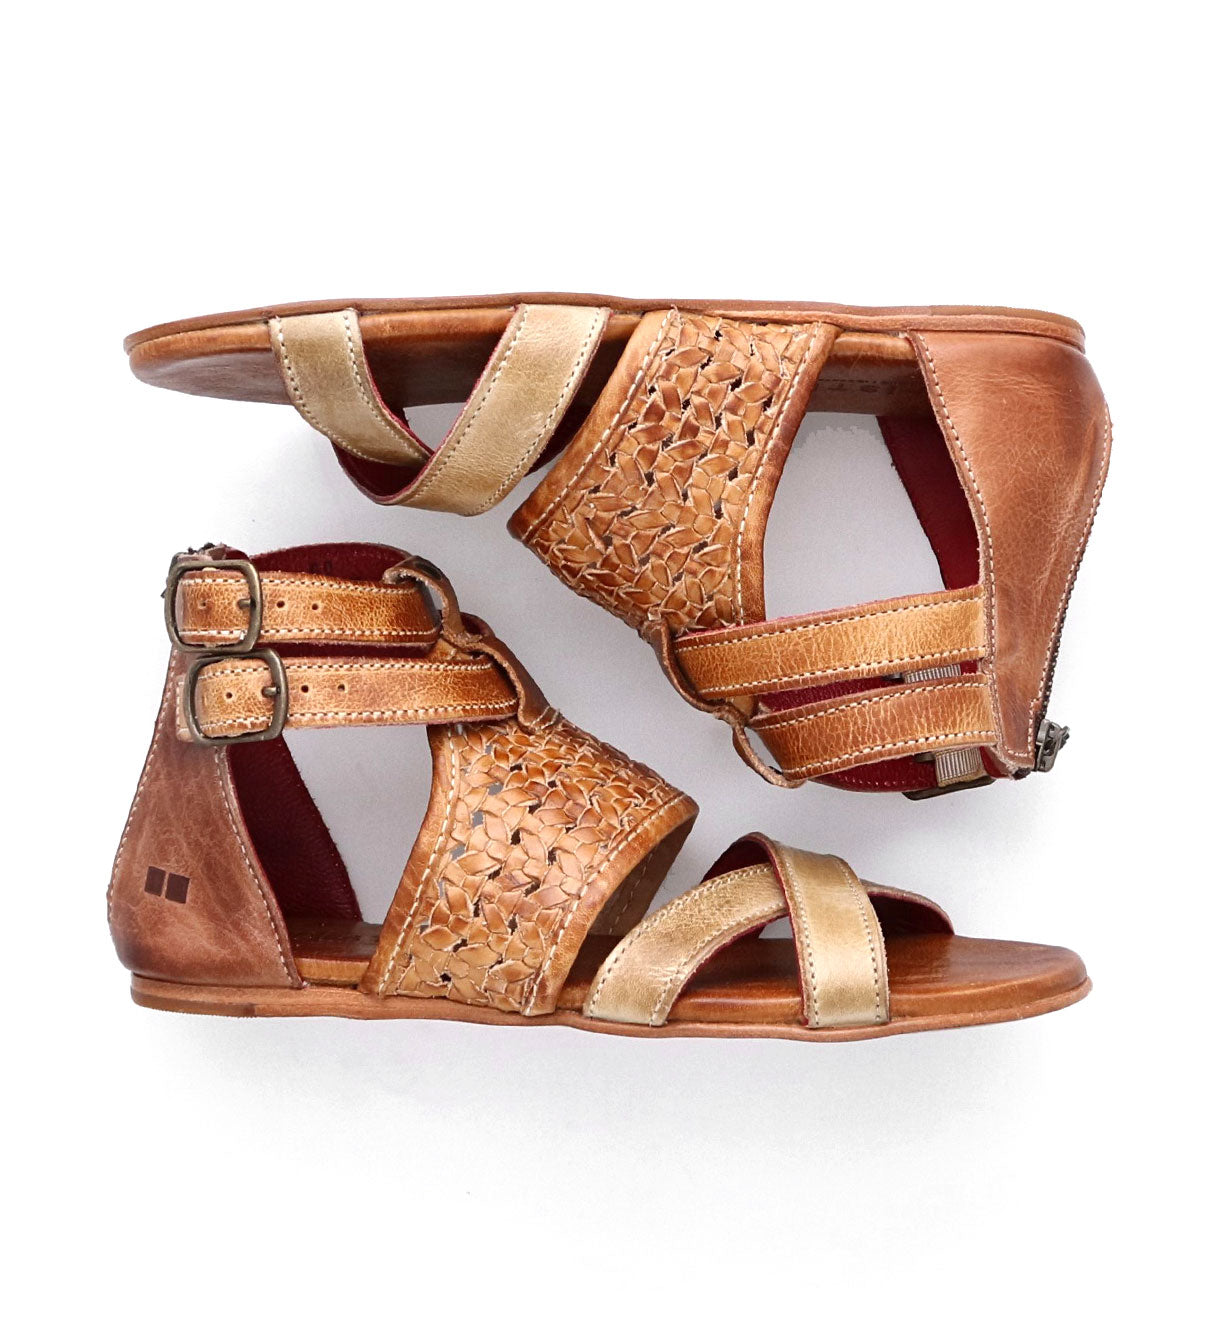 A pair of Bed Stu Capriana women's sandals with tan and brown straps.